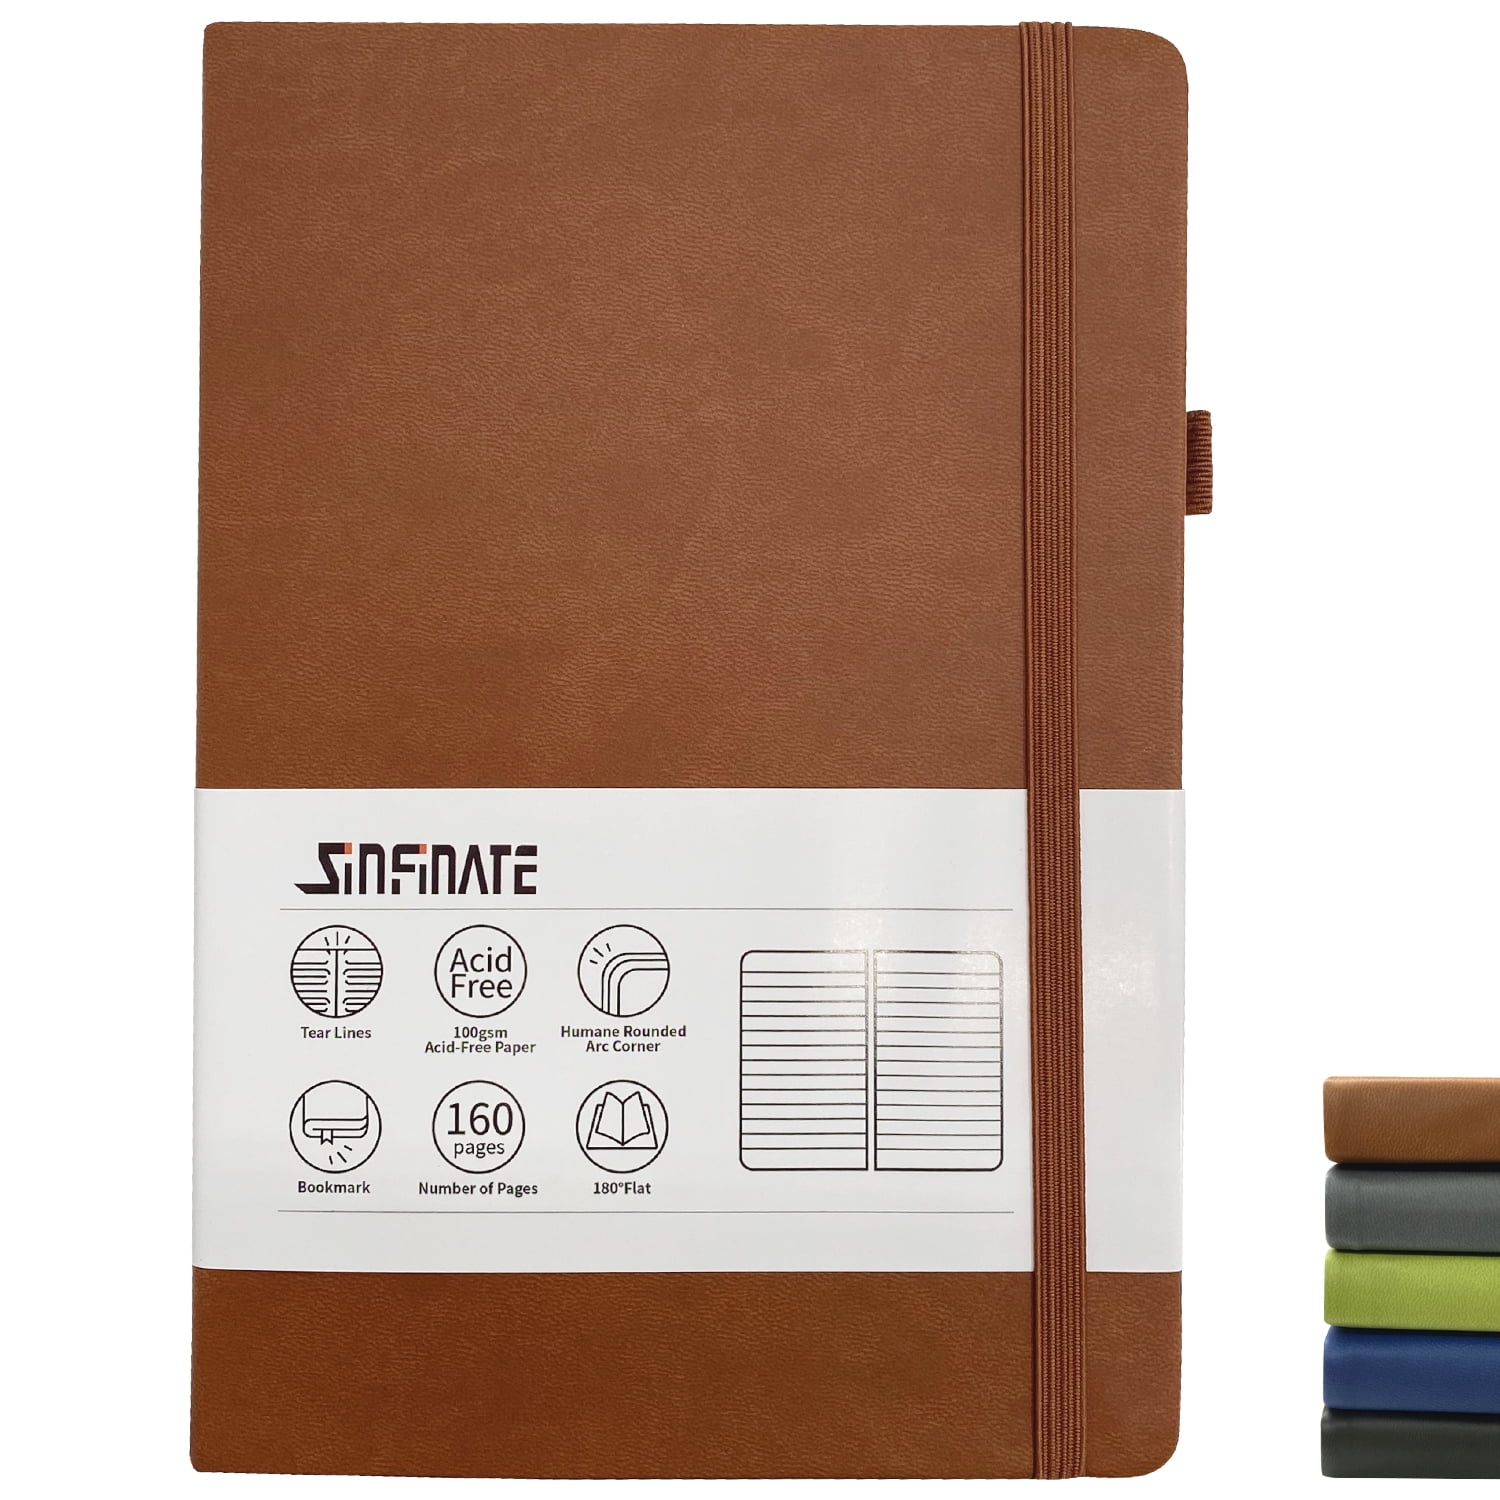 Color : -, Size : - Artificial Leather Cover Notebook Diary Diary Traveler Book Diary Blank 1 lxhff